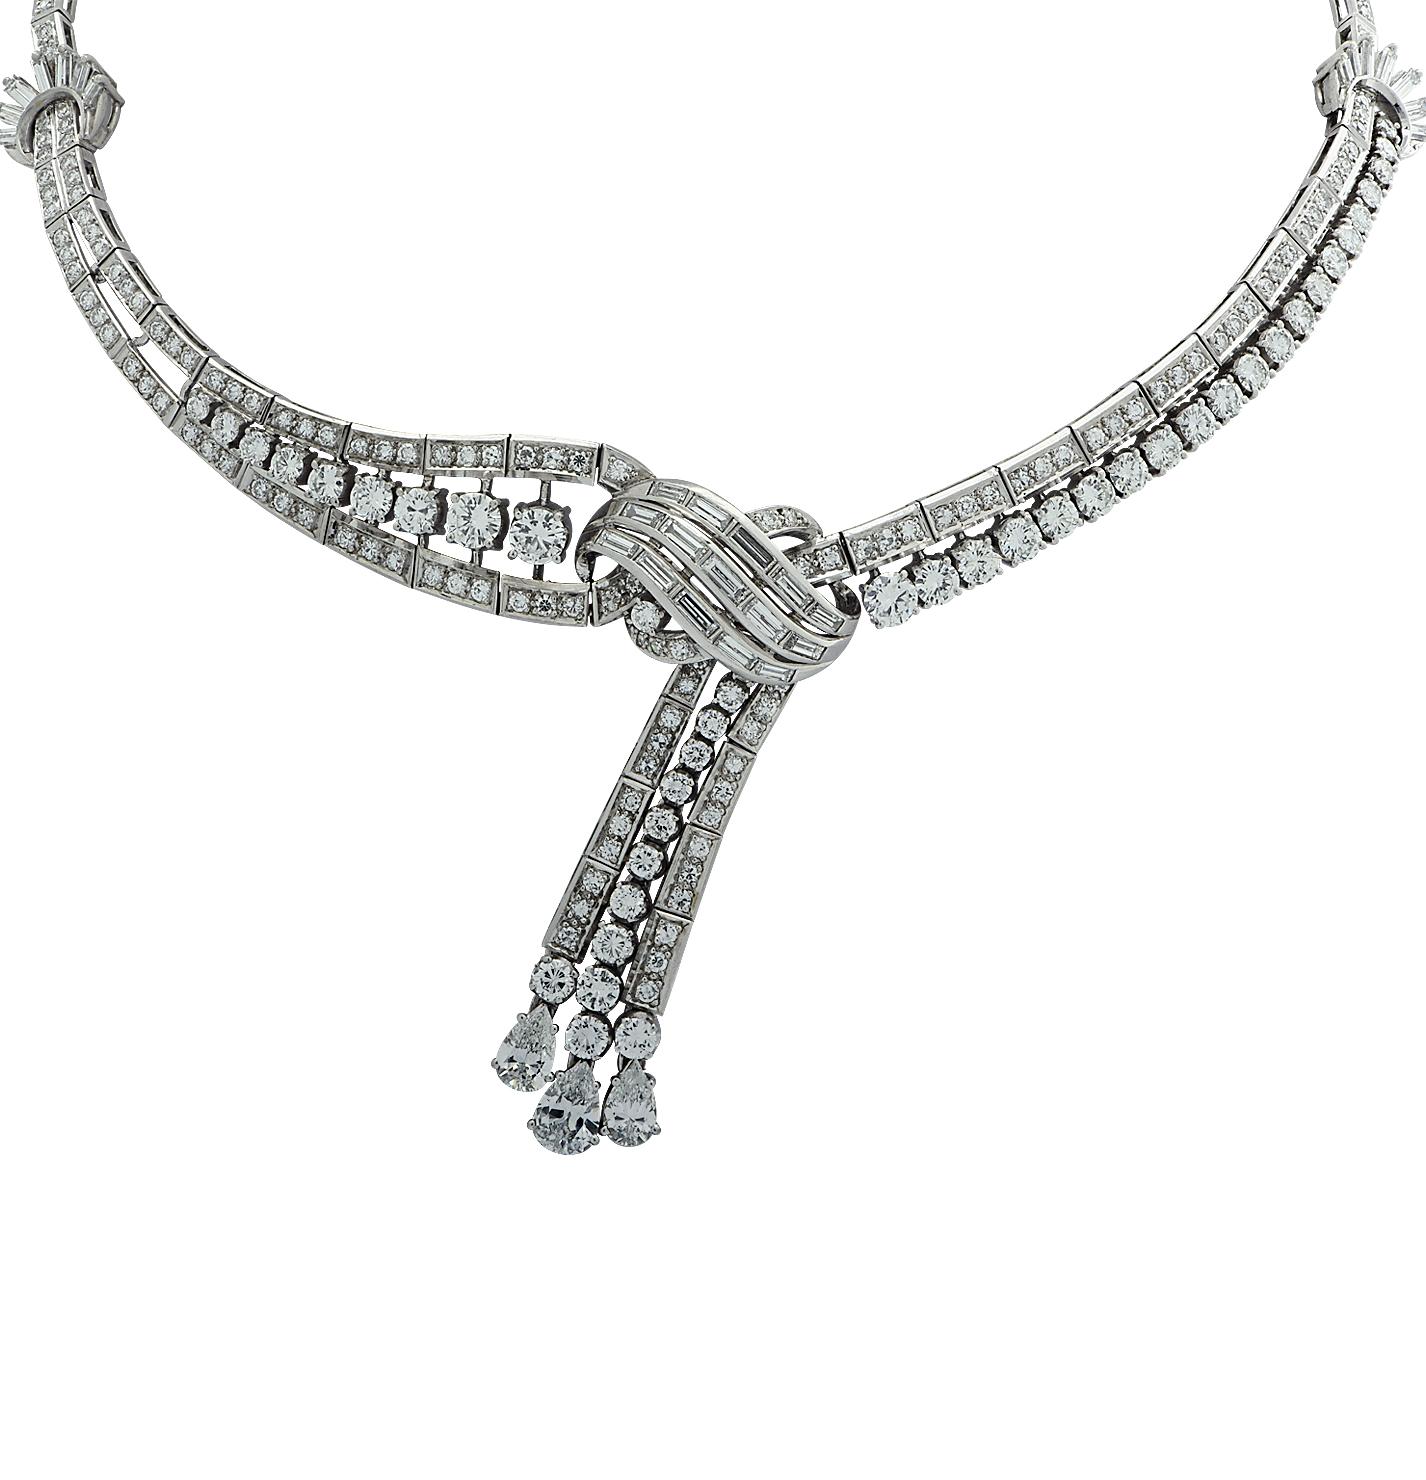 Mid Century diamond necklace crafted in Platinum, featuring round brilliant cut diamonds, pear shape diamonds and baguette cut diamonds weighing approximately 18.00 carats total, F-H color, VS clarity. Channel set round brilliant cut diamond station